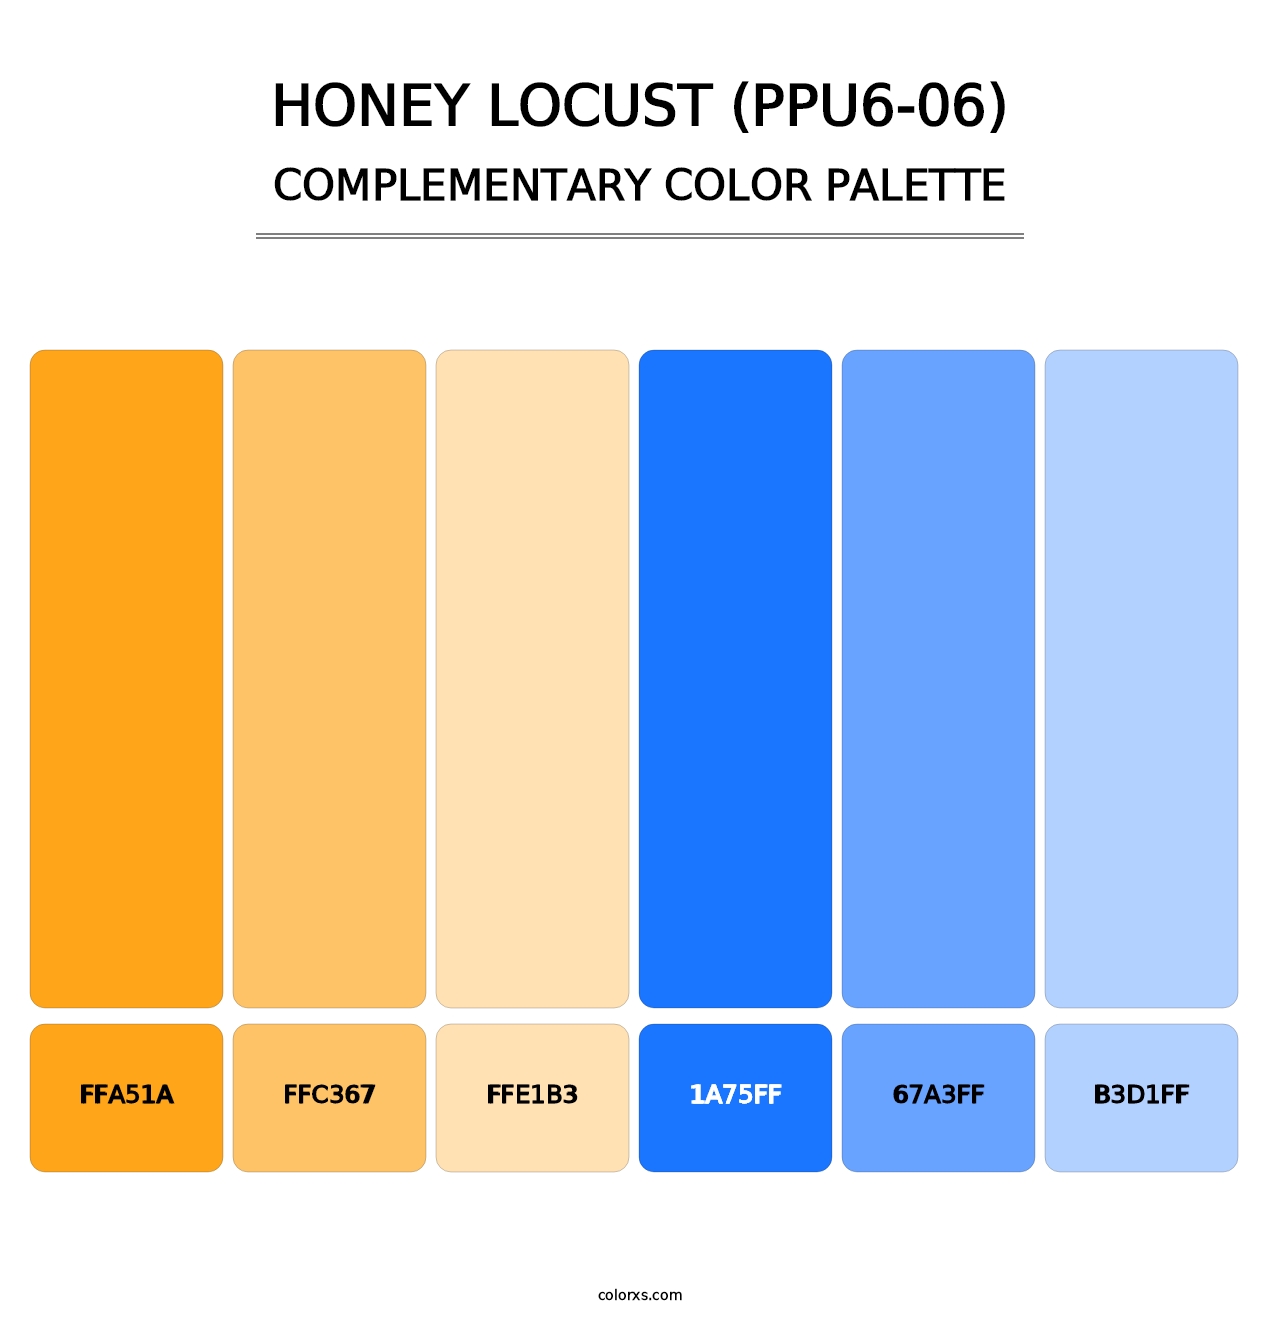 Honey Locust (PPU6-06) - Complementary Color Palette